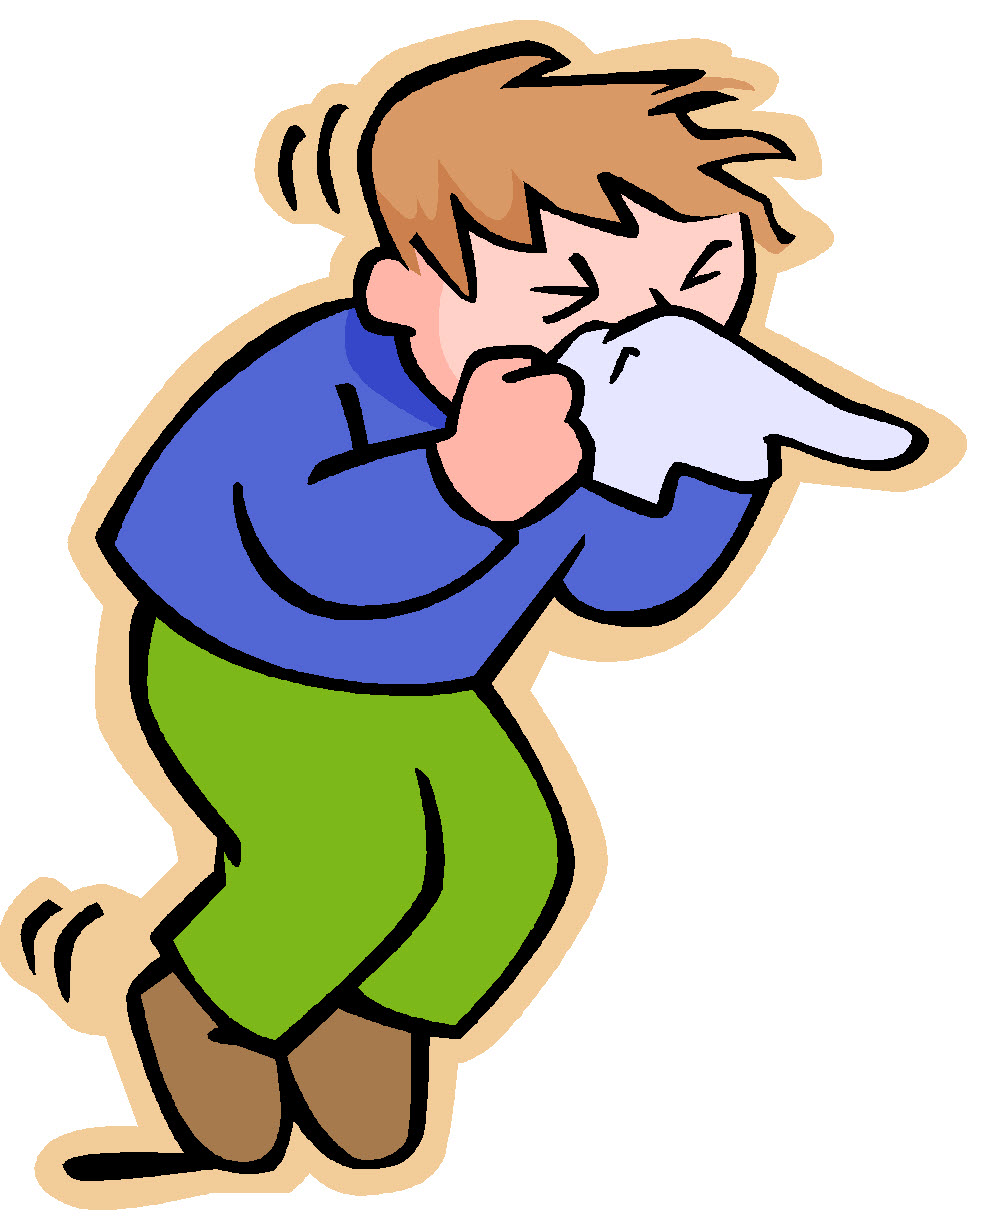 Sneezing Man With Cold Or Flu Jpg